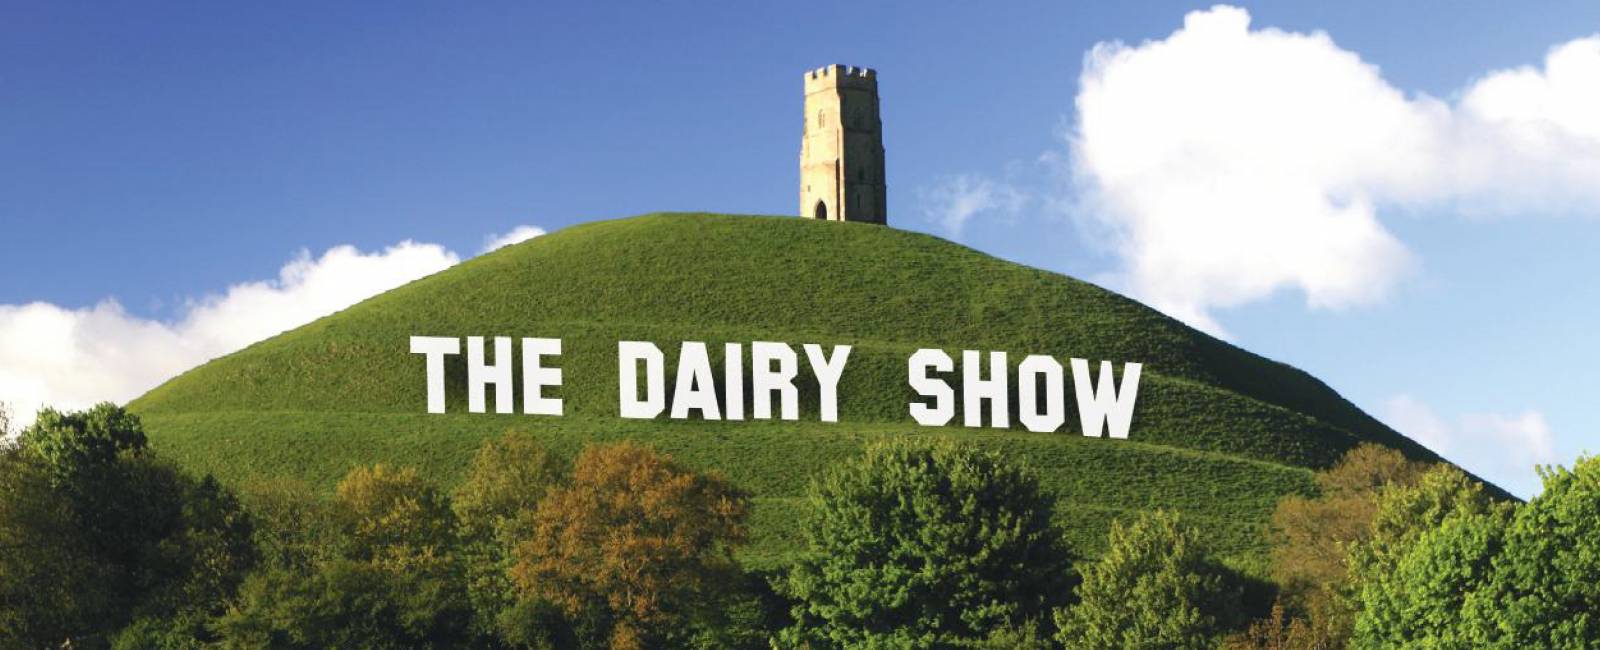 The Dairy Show 2017